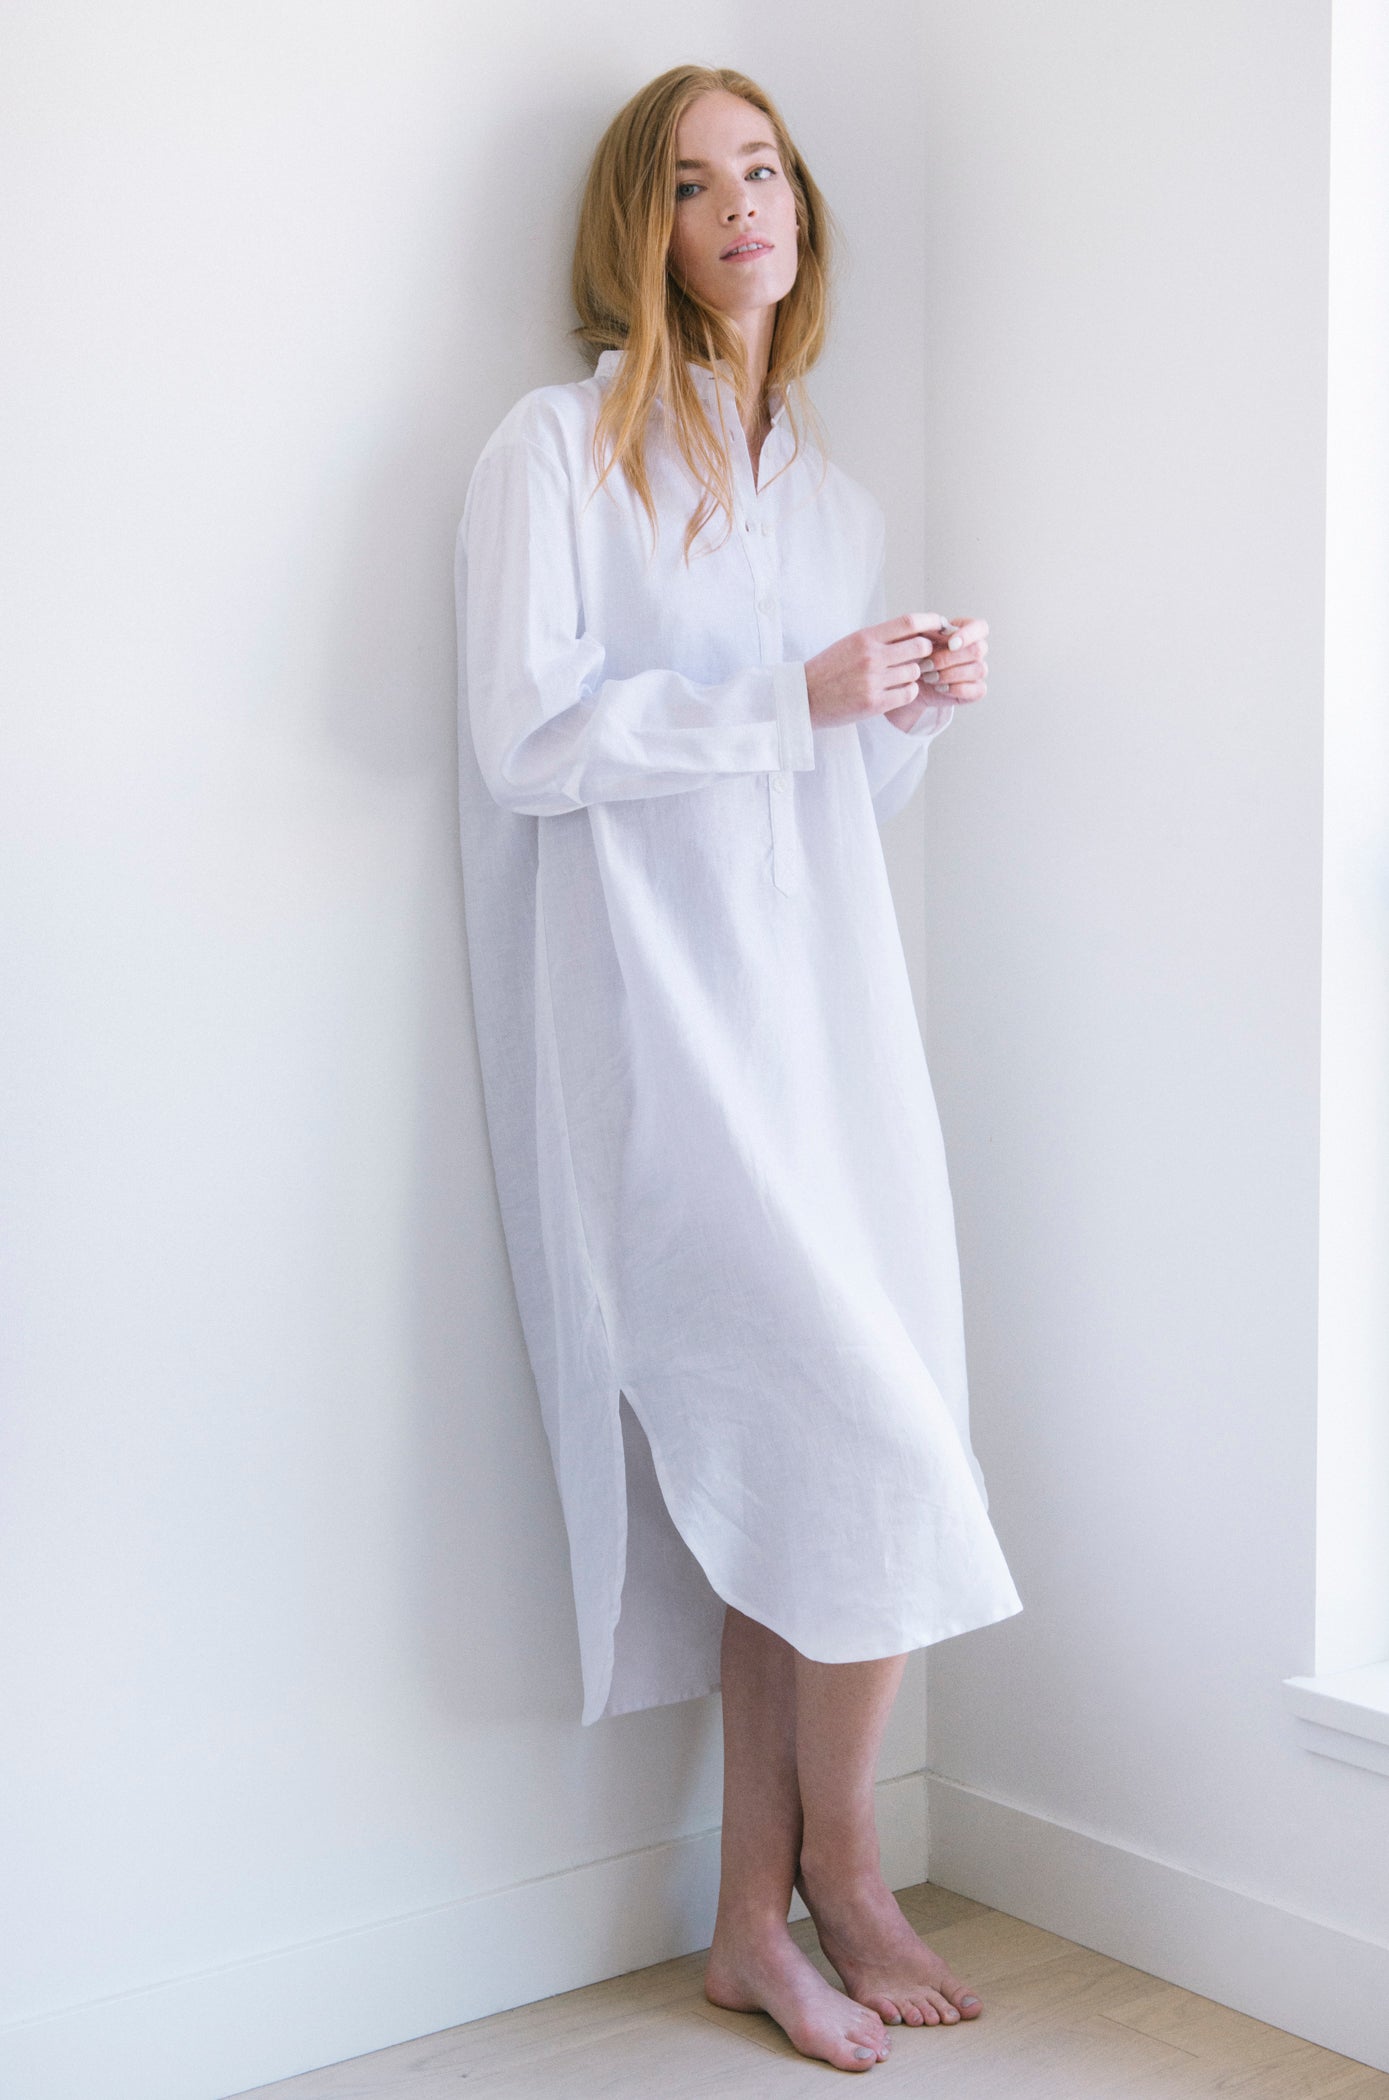 editorial shot of ankle length sleep shirt in white linen by The Sleep Shirt